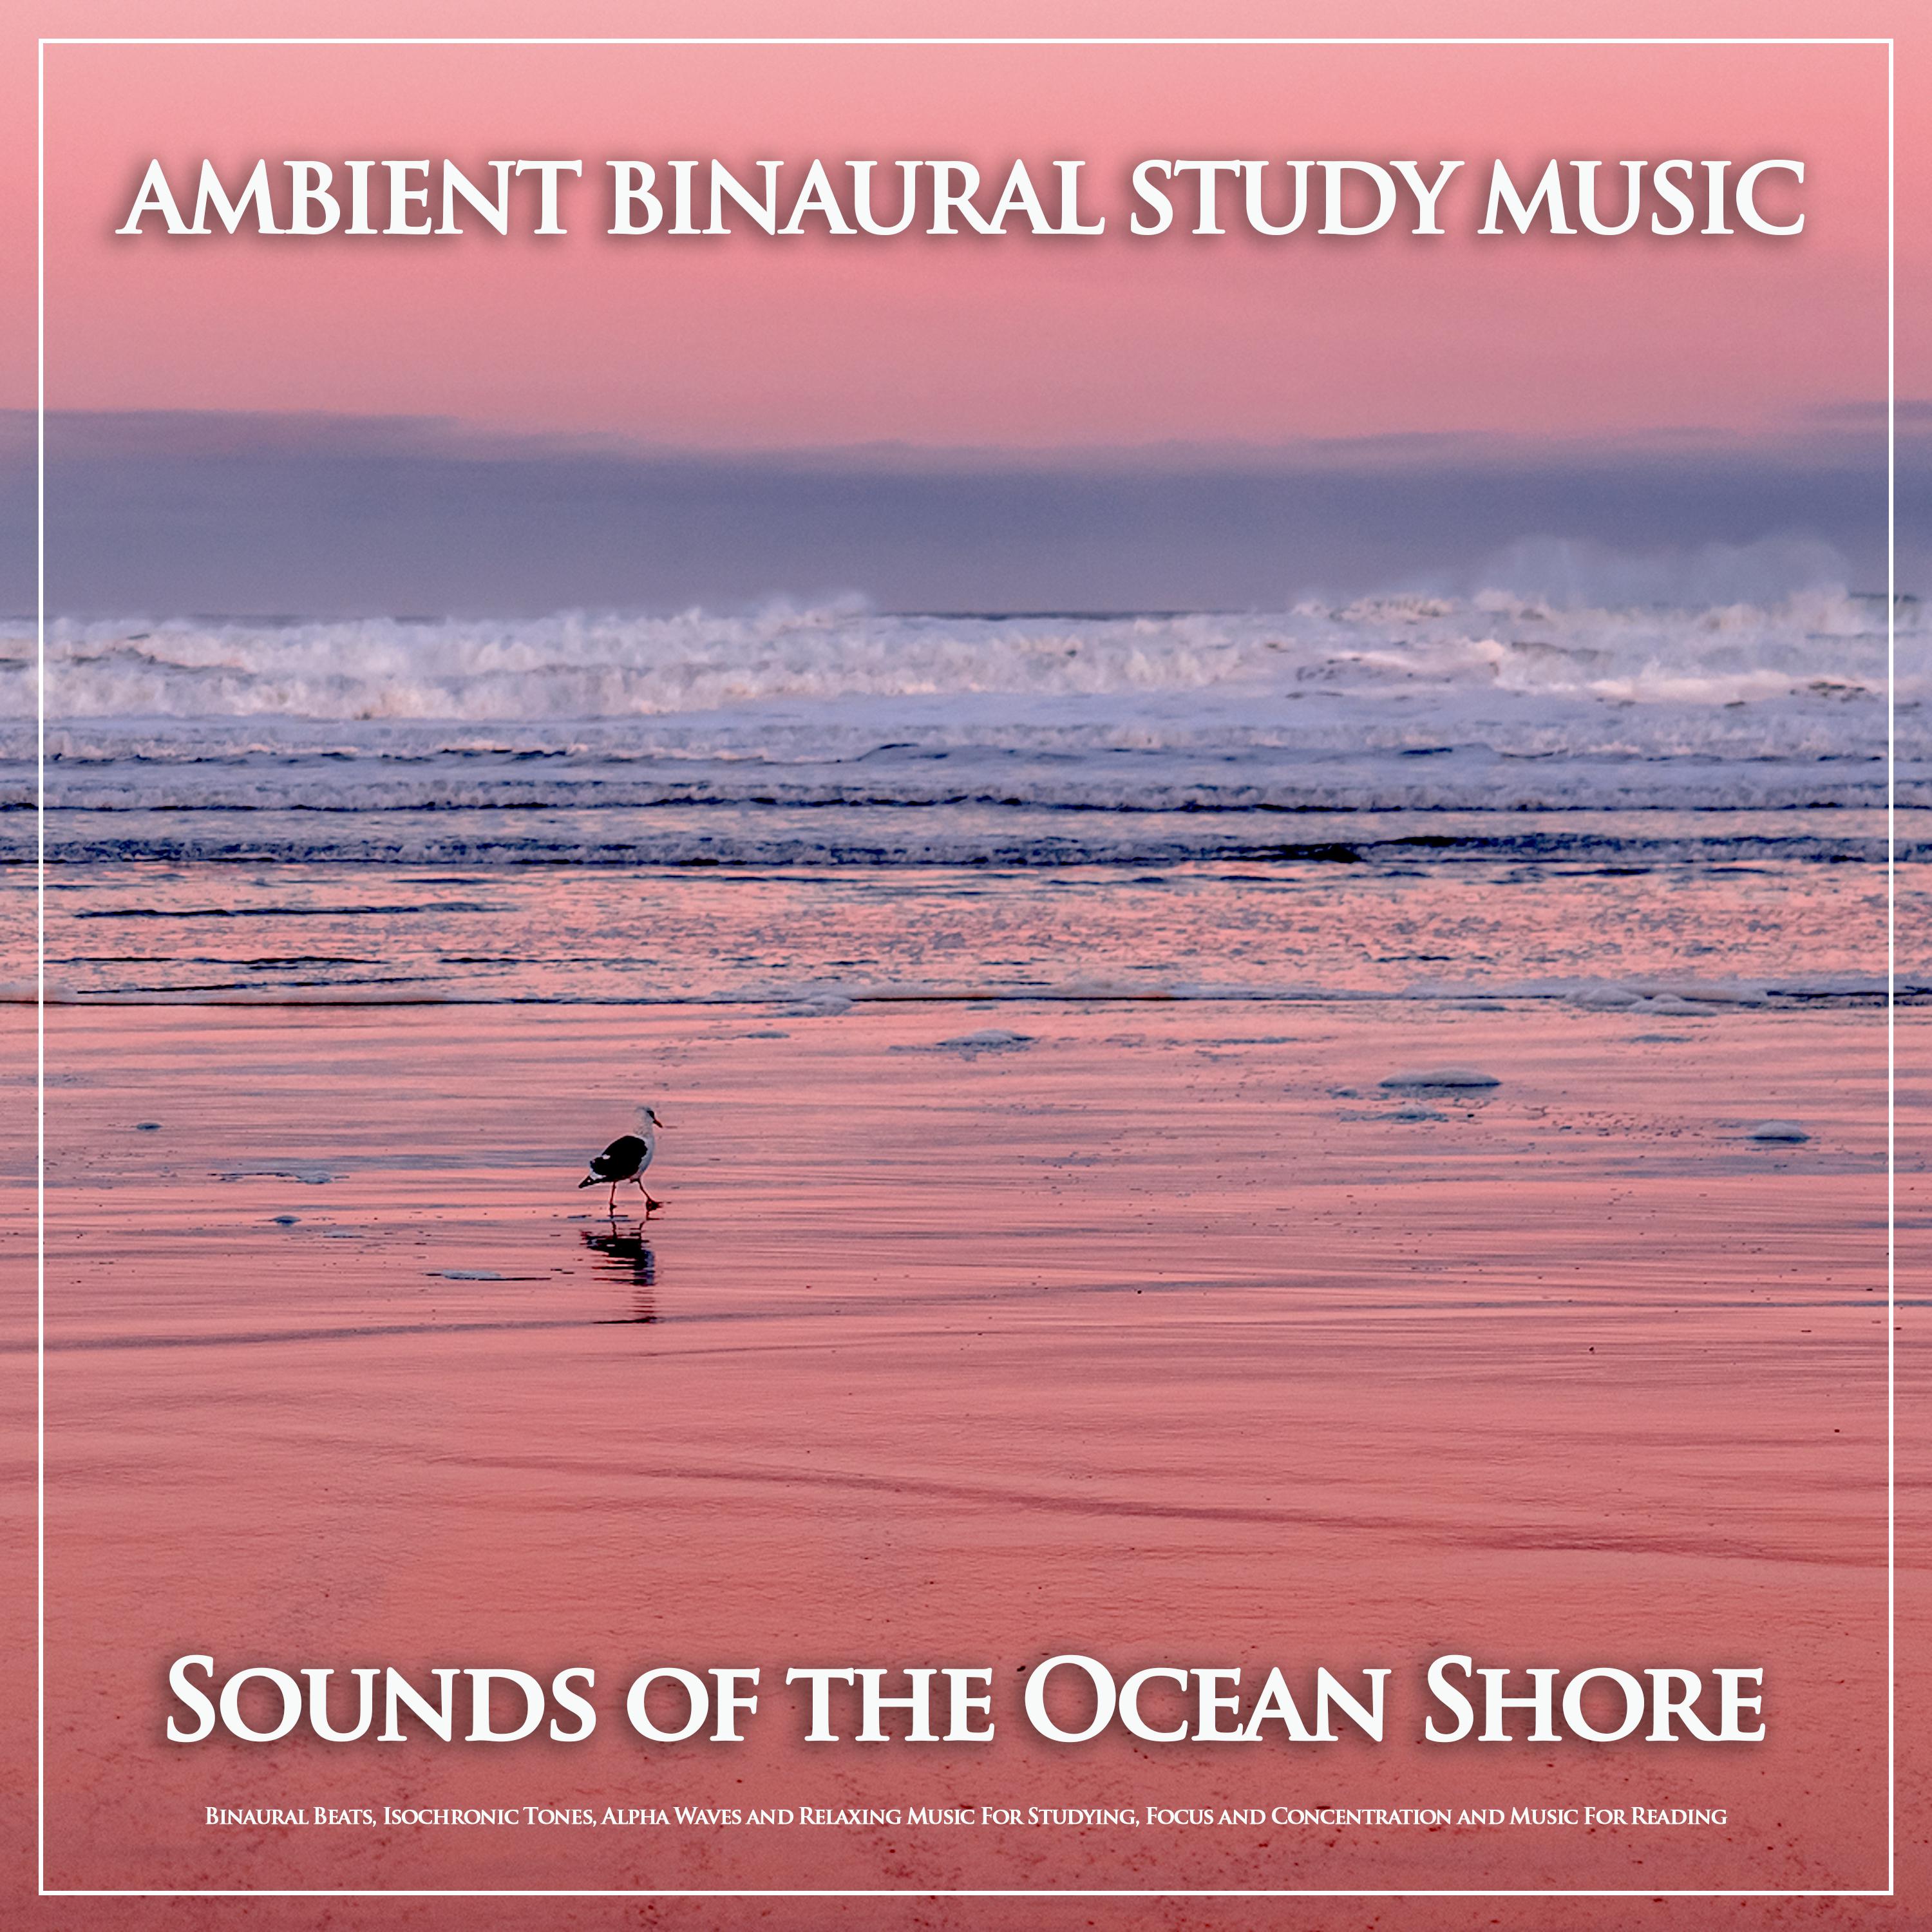 Ocean Waves and Binaural Beats For Studying